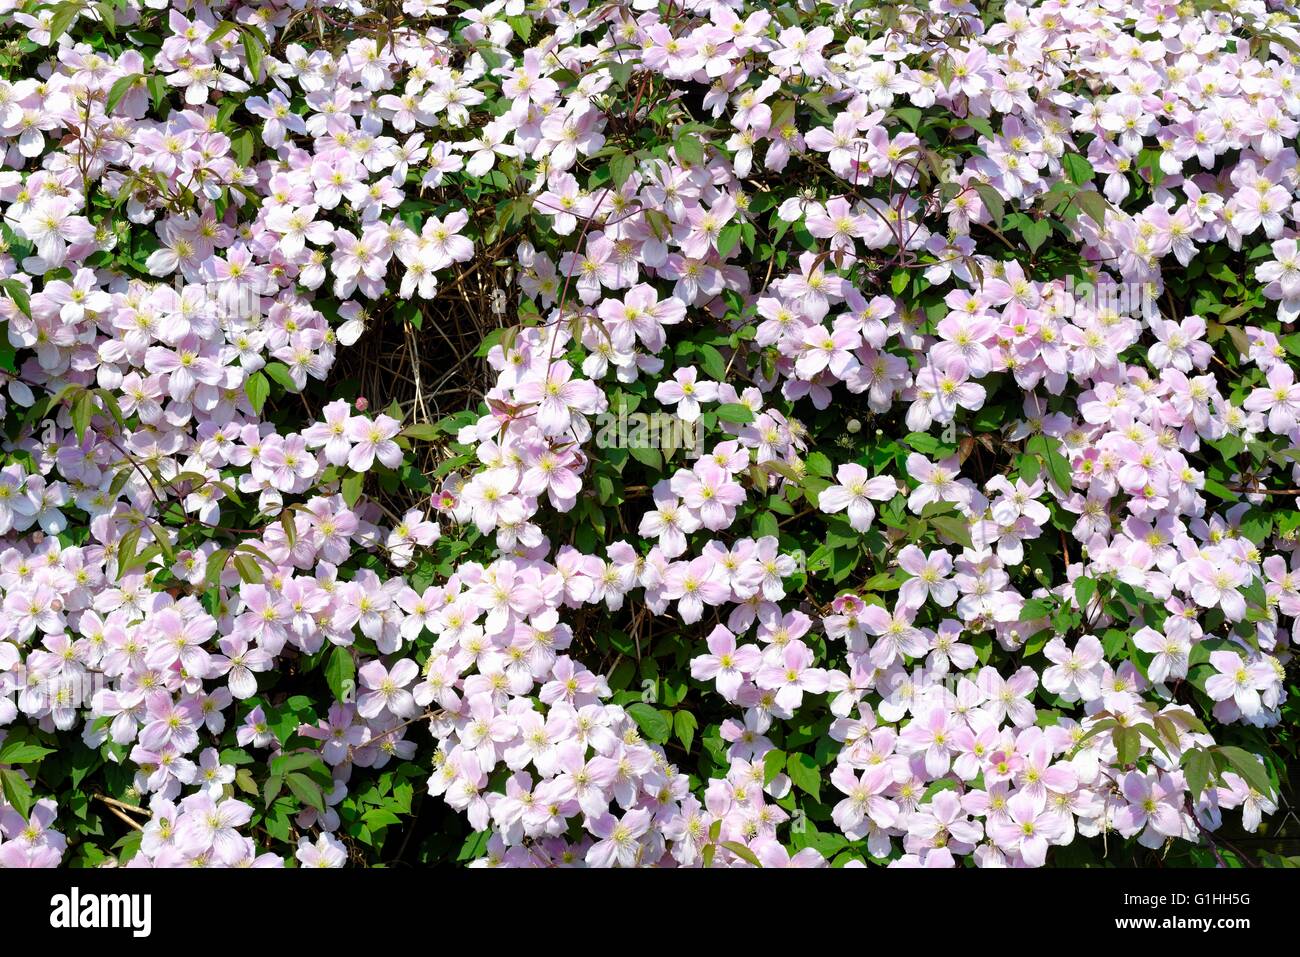 Close up of flowers on a Clematis Montana climbing plant Stock Photo